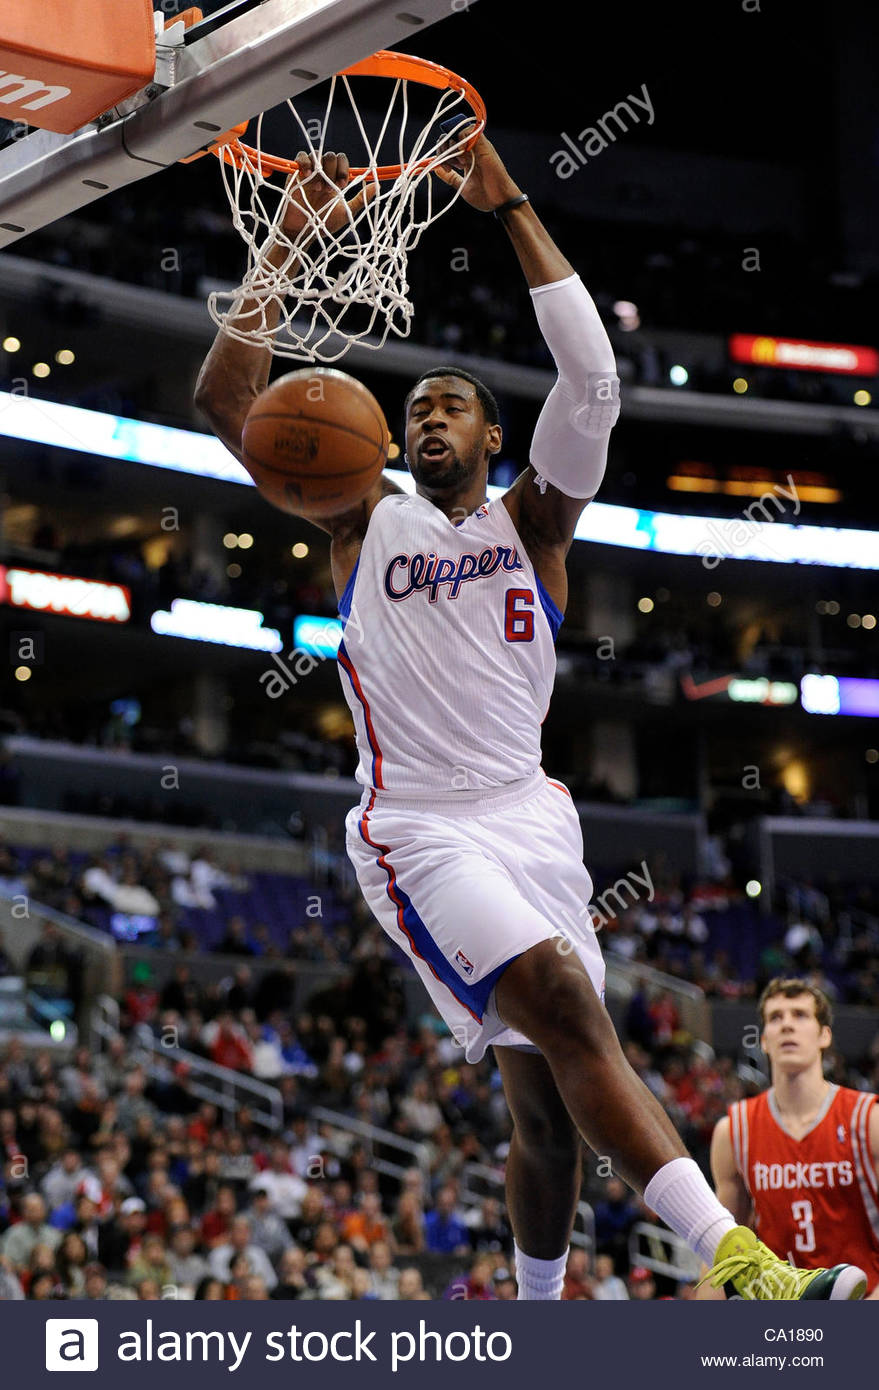 The Clippers Deandre Jordan 6 Dunks The Ball As The Rockets Stock Photo Alamy